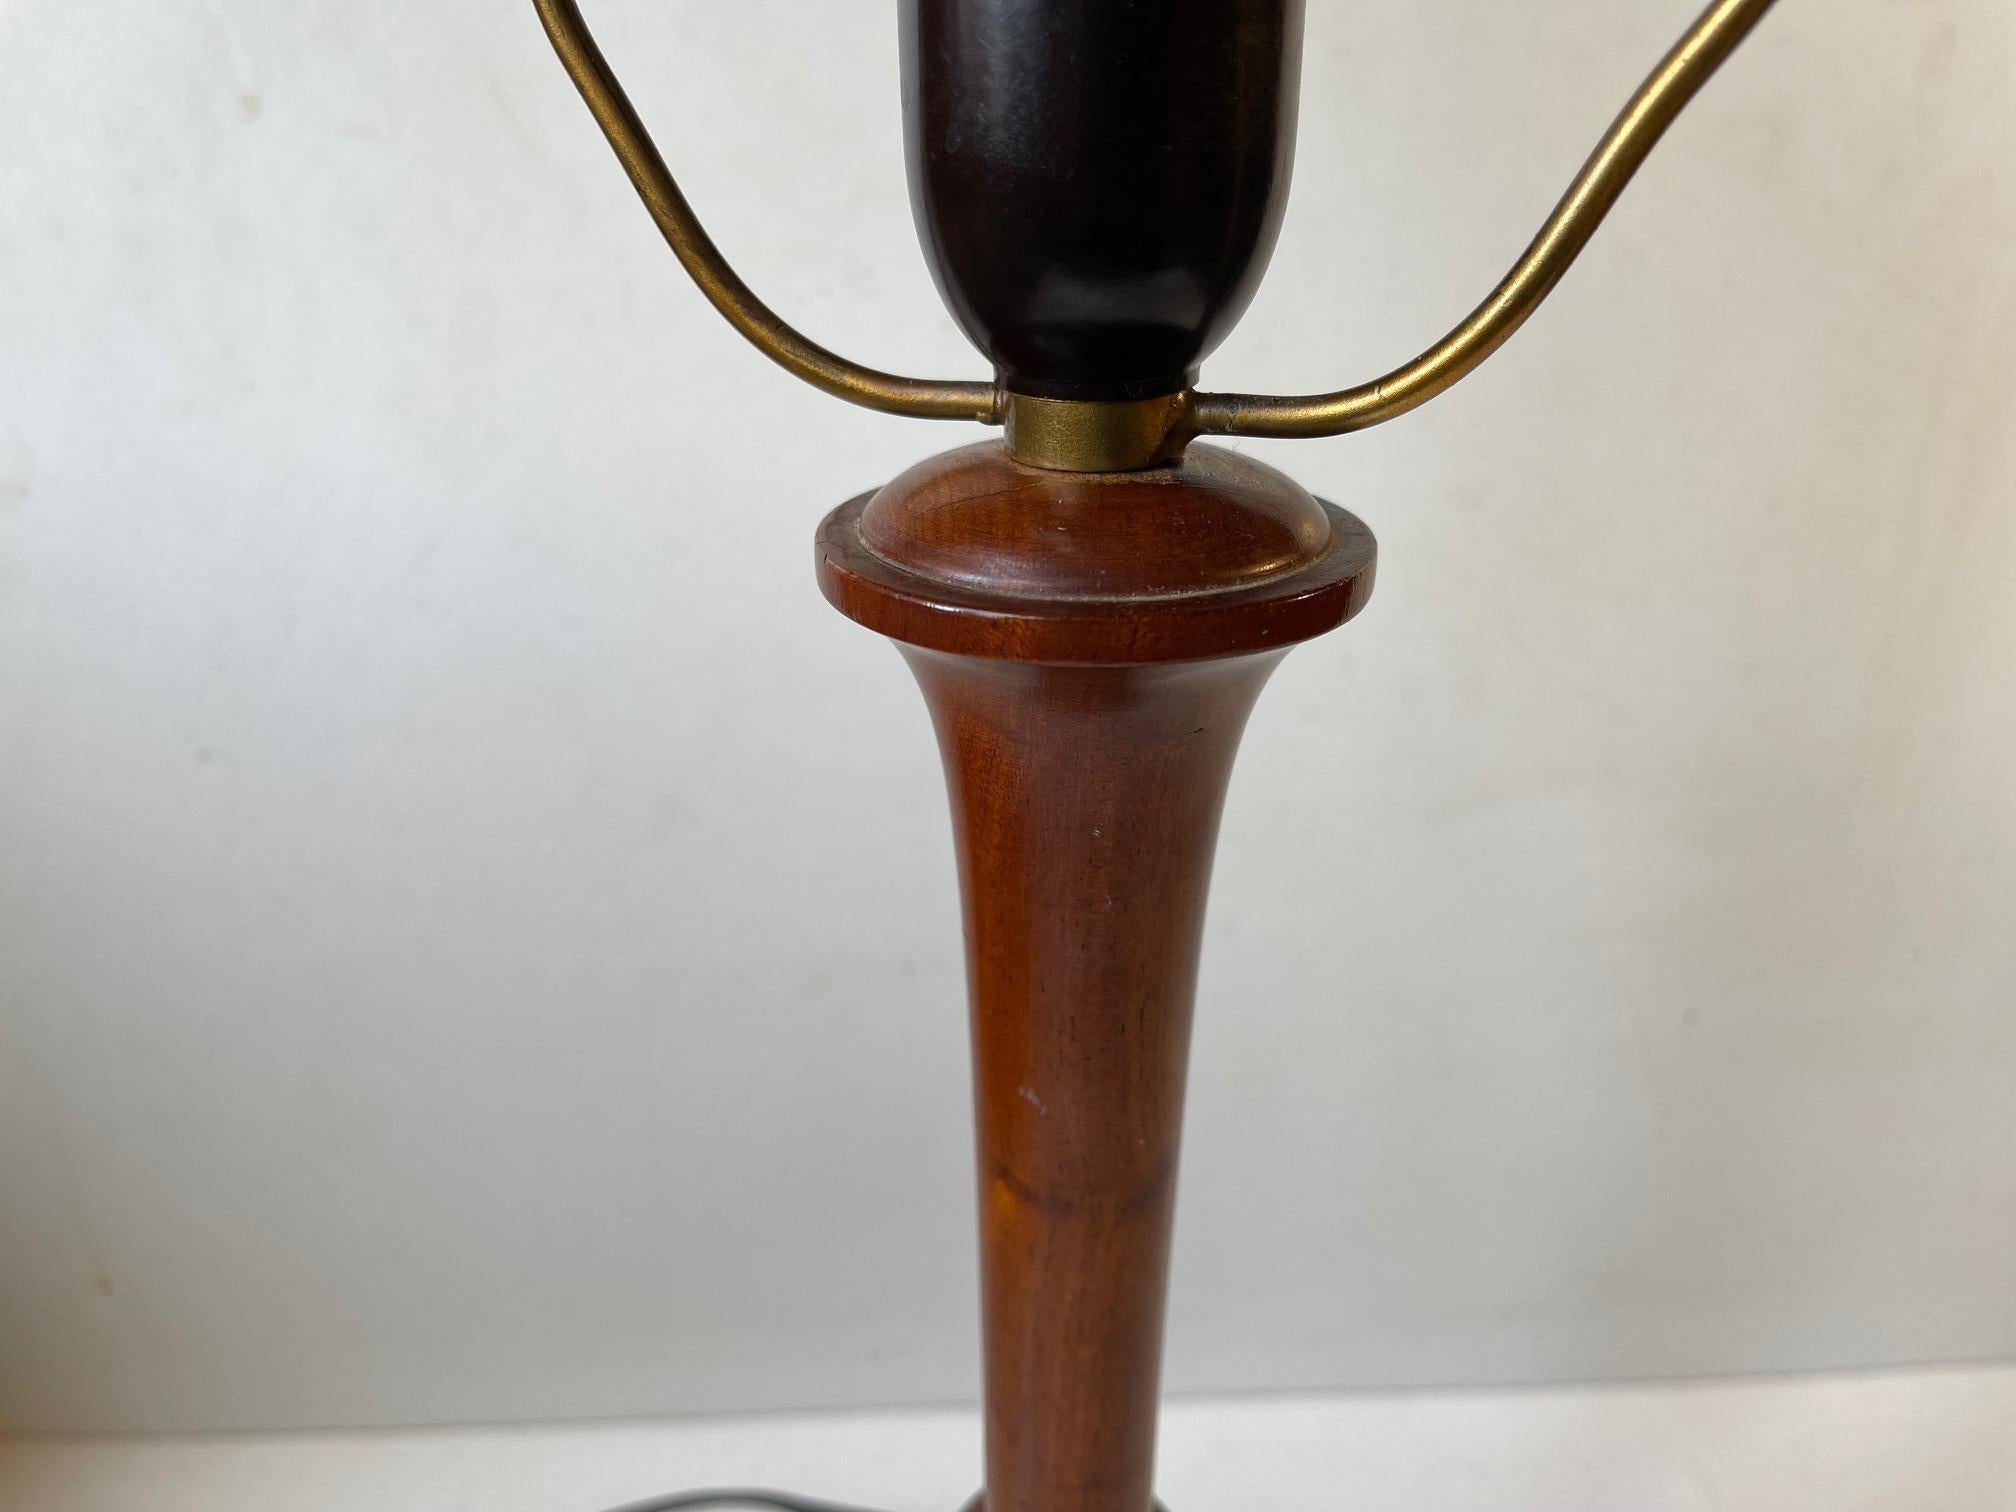 Scandinavian Modern Table Lamp in Walnut and Brass, 1950s In Good Condition For Sale In Esbjerg, DK